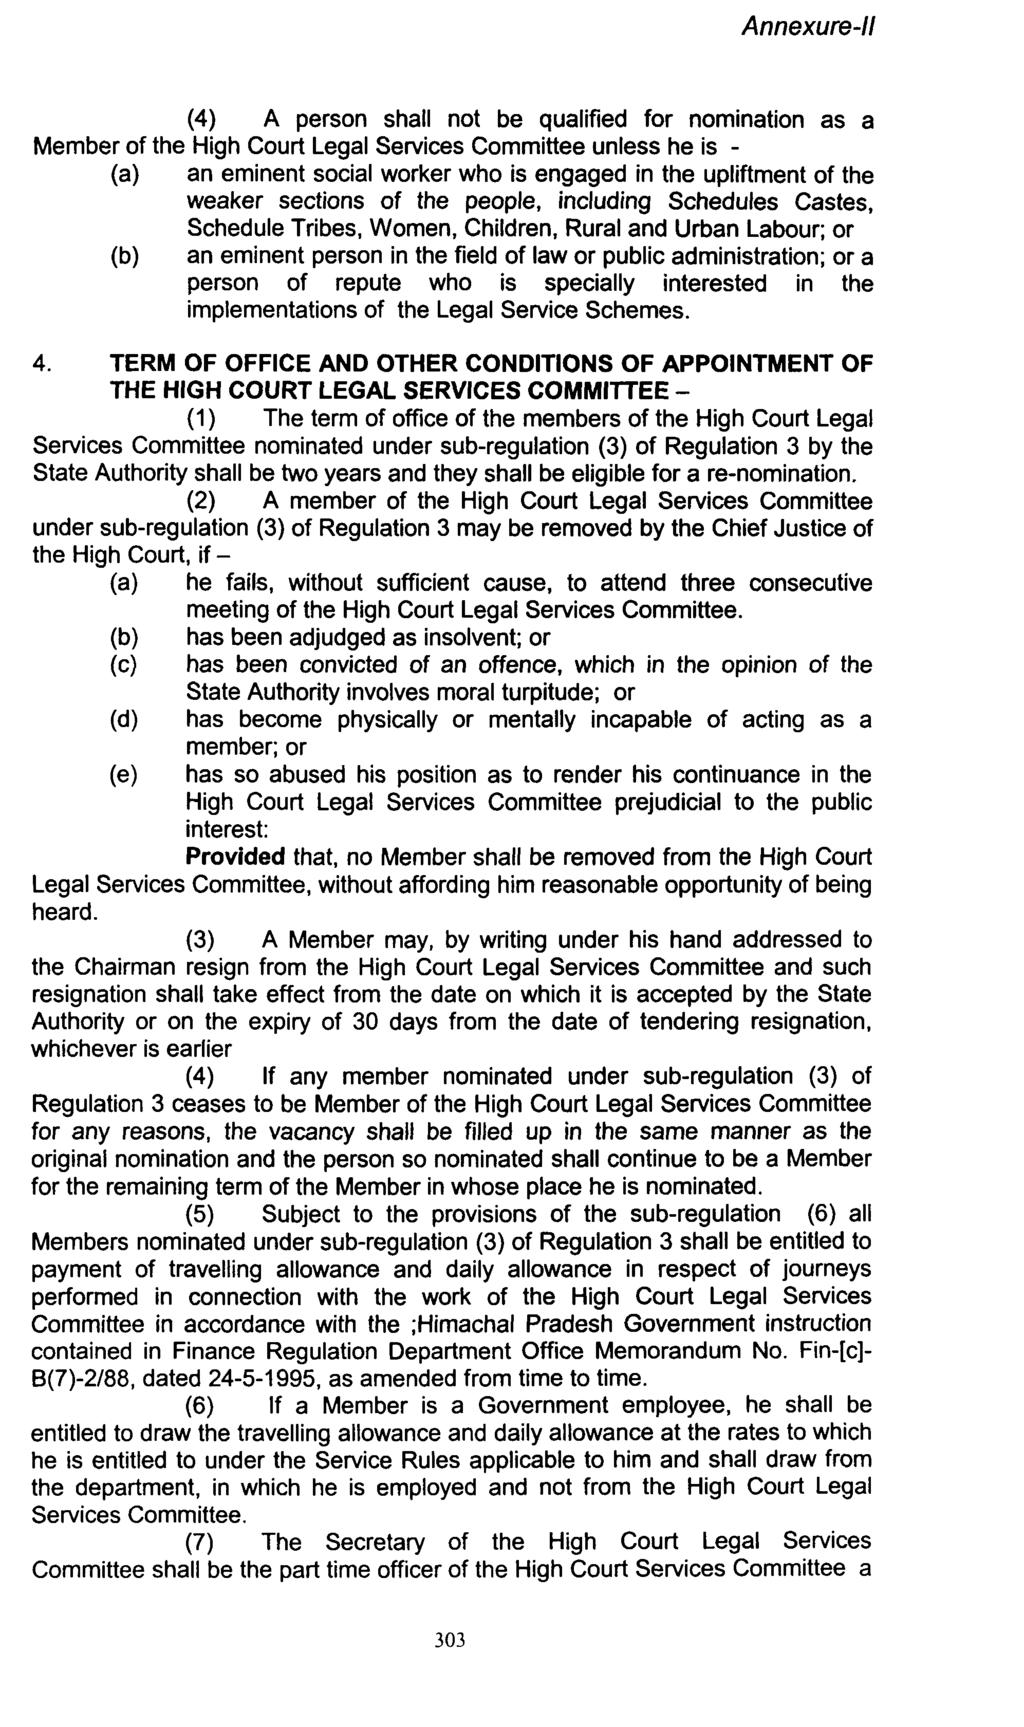 Annexure-ll (4) A person shall not be qualified for nomination as a Member of the High Court Legal Services Committee unless he is - (a) an eminent social worker who is engaged in the upliftment of